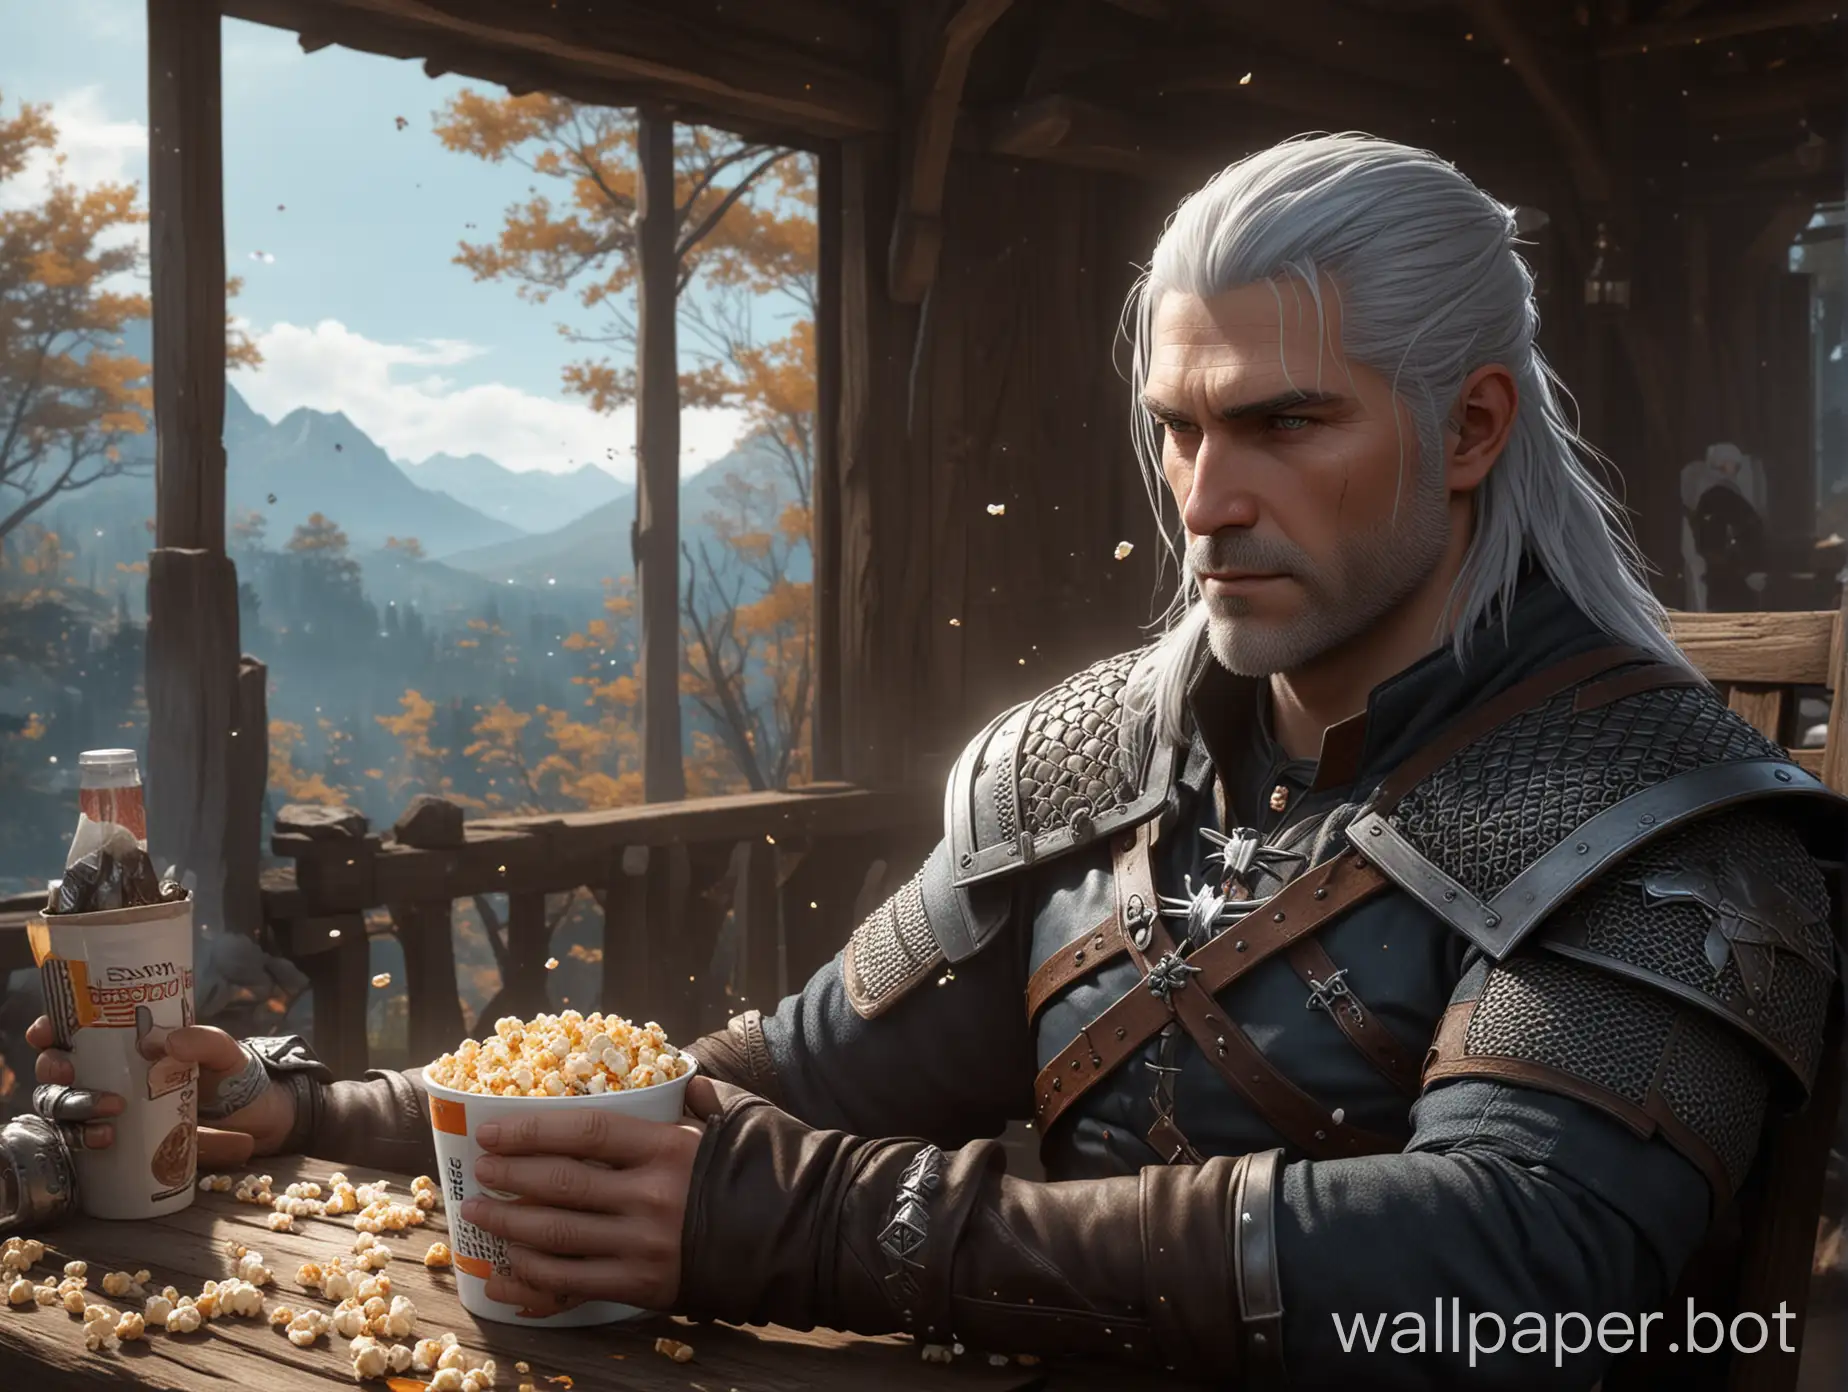 geralt sits at the comp and watches anime in hands popcorn and tea in hands, we can see monitor